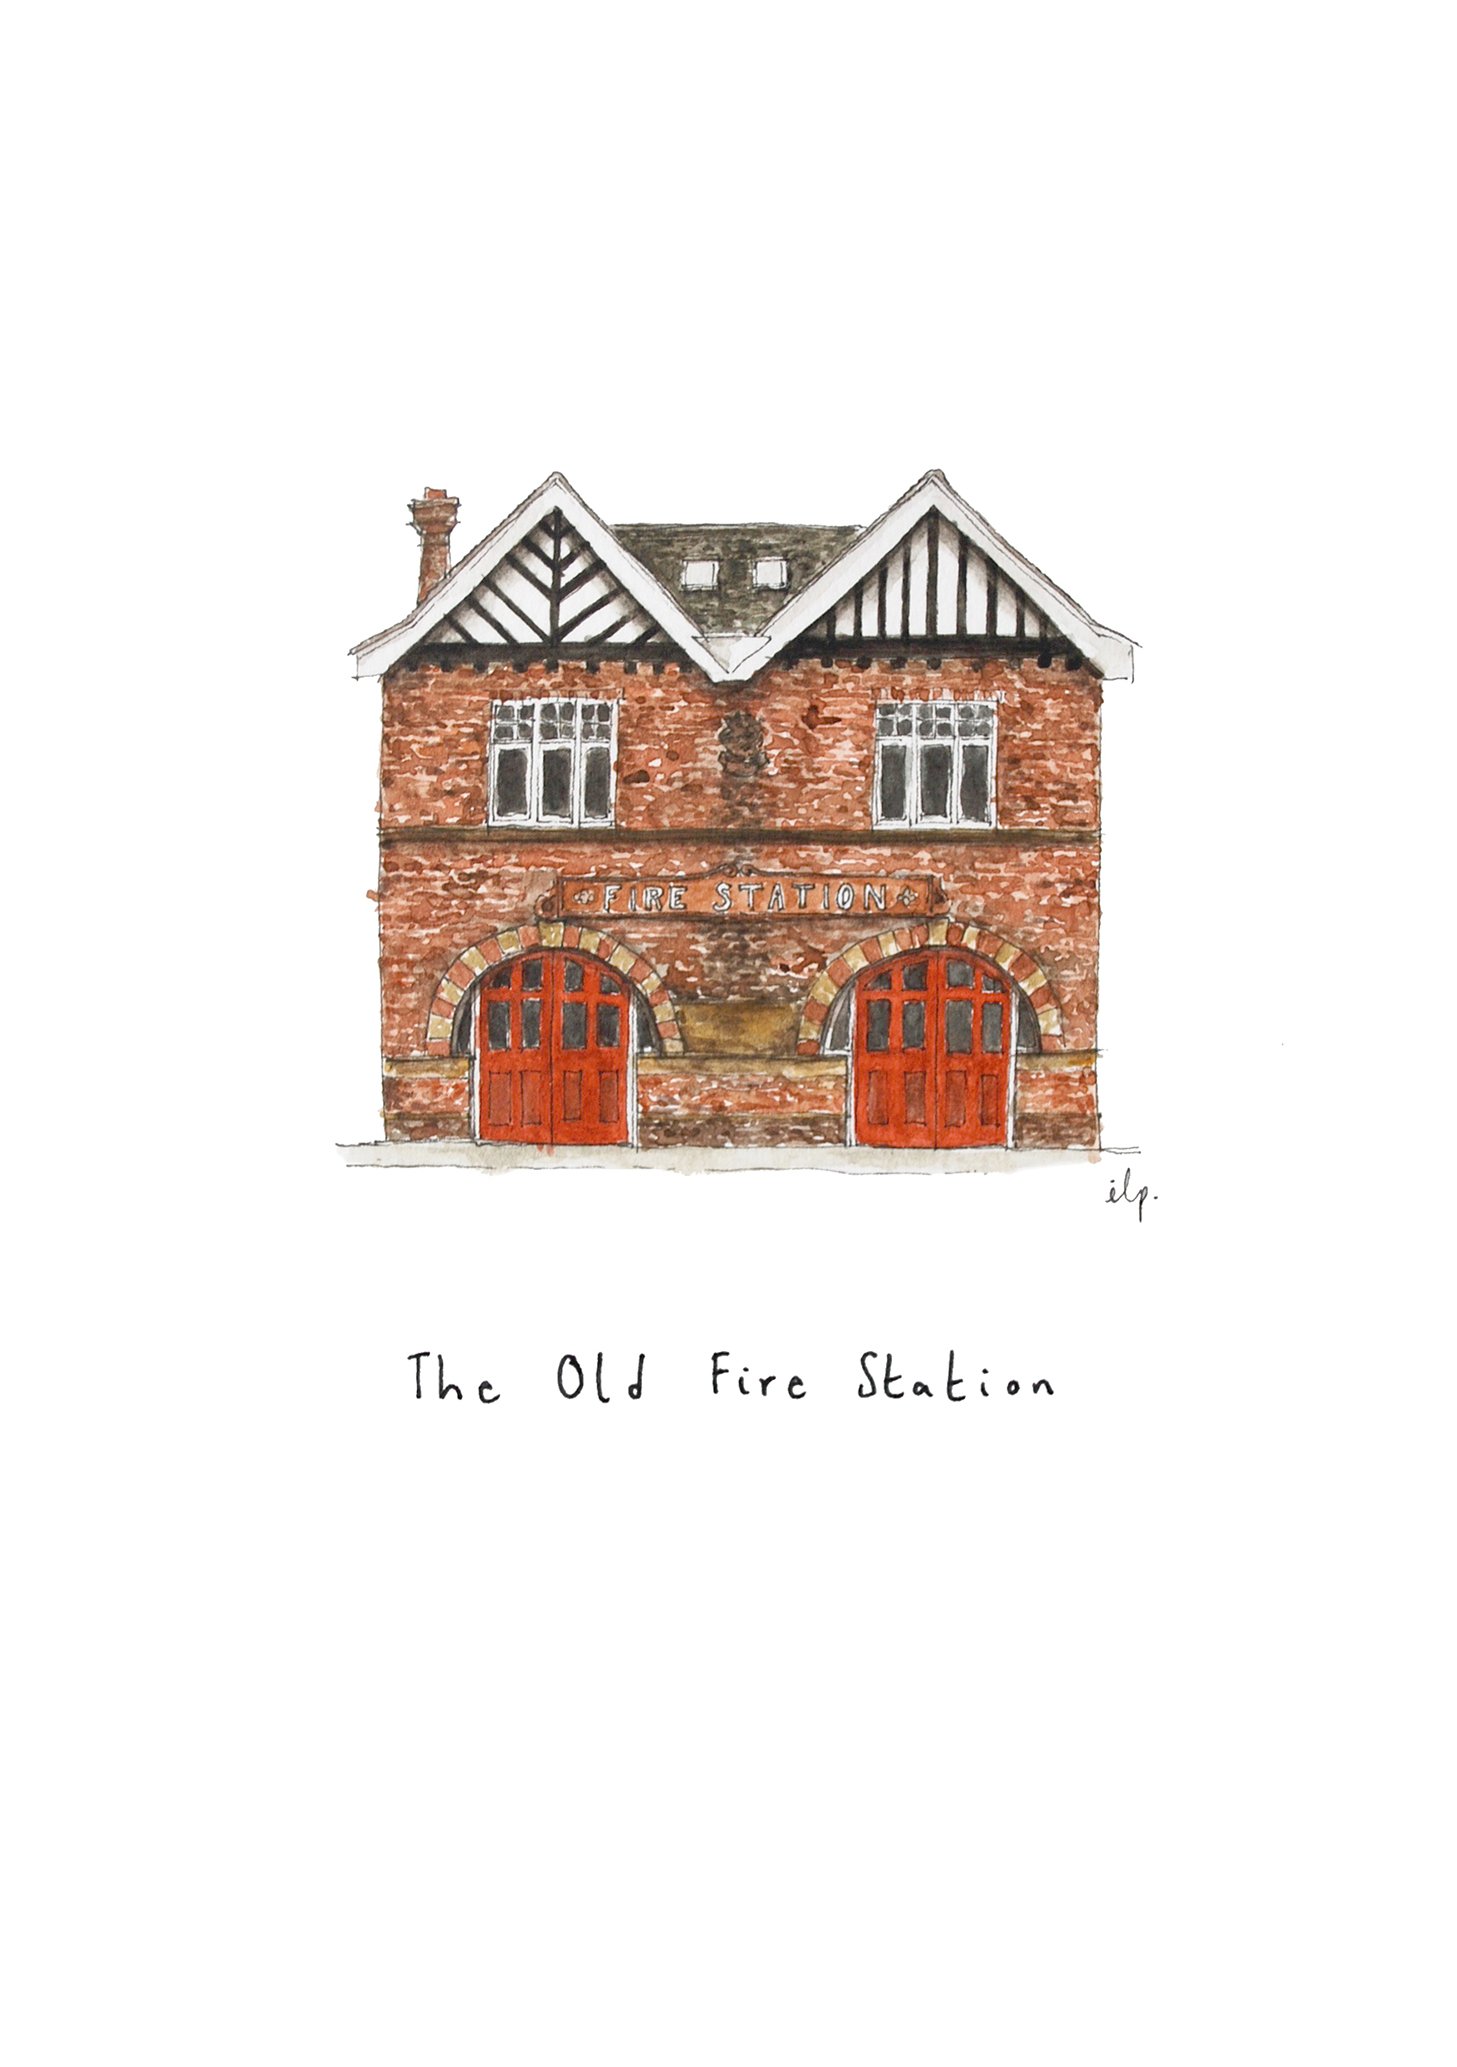 The Old Fire Station, Tonbridge